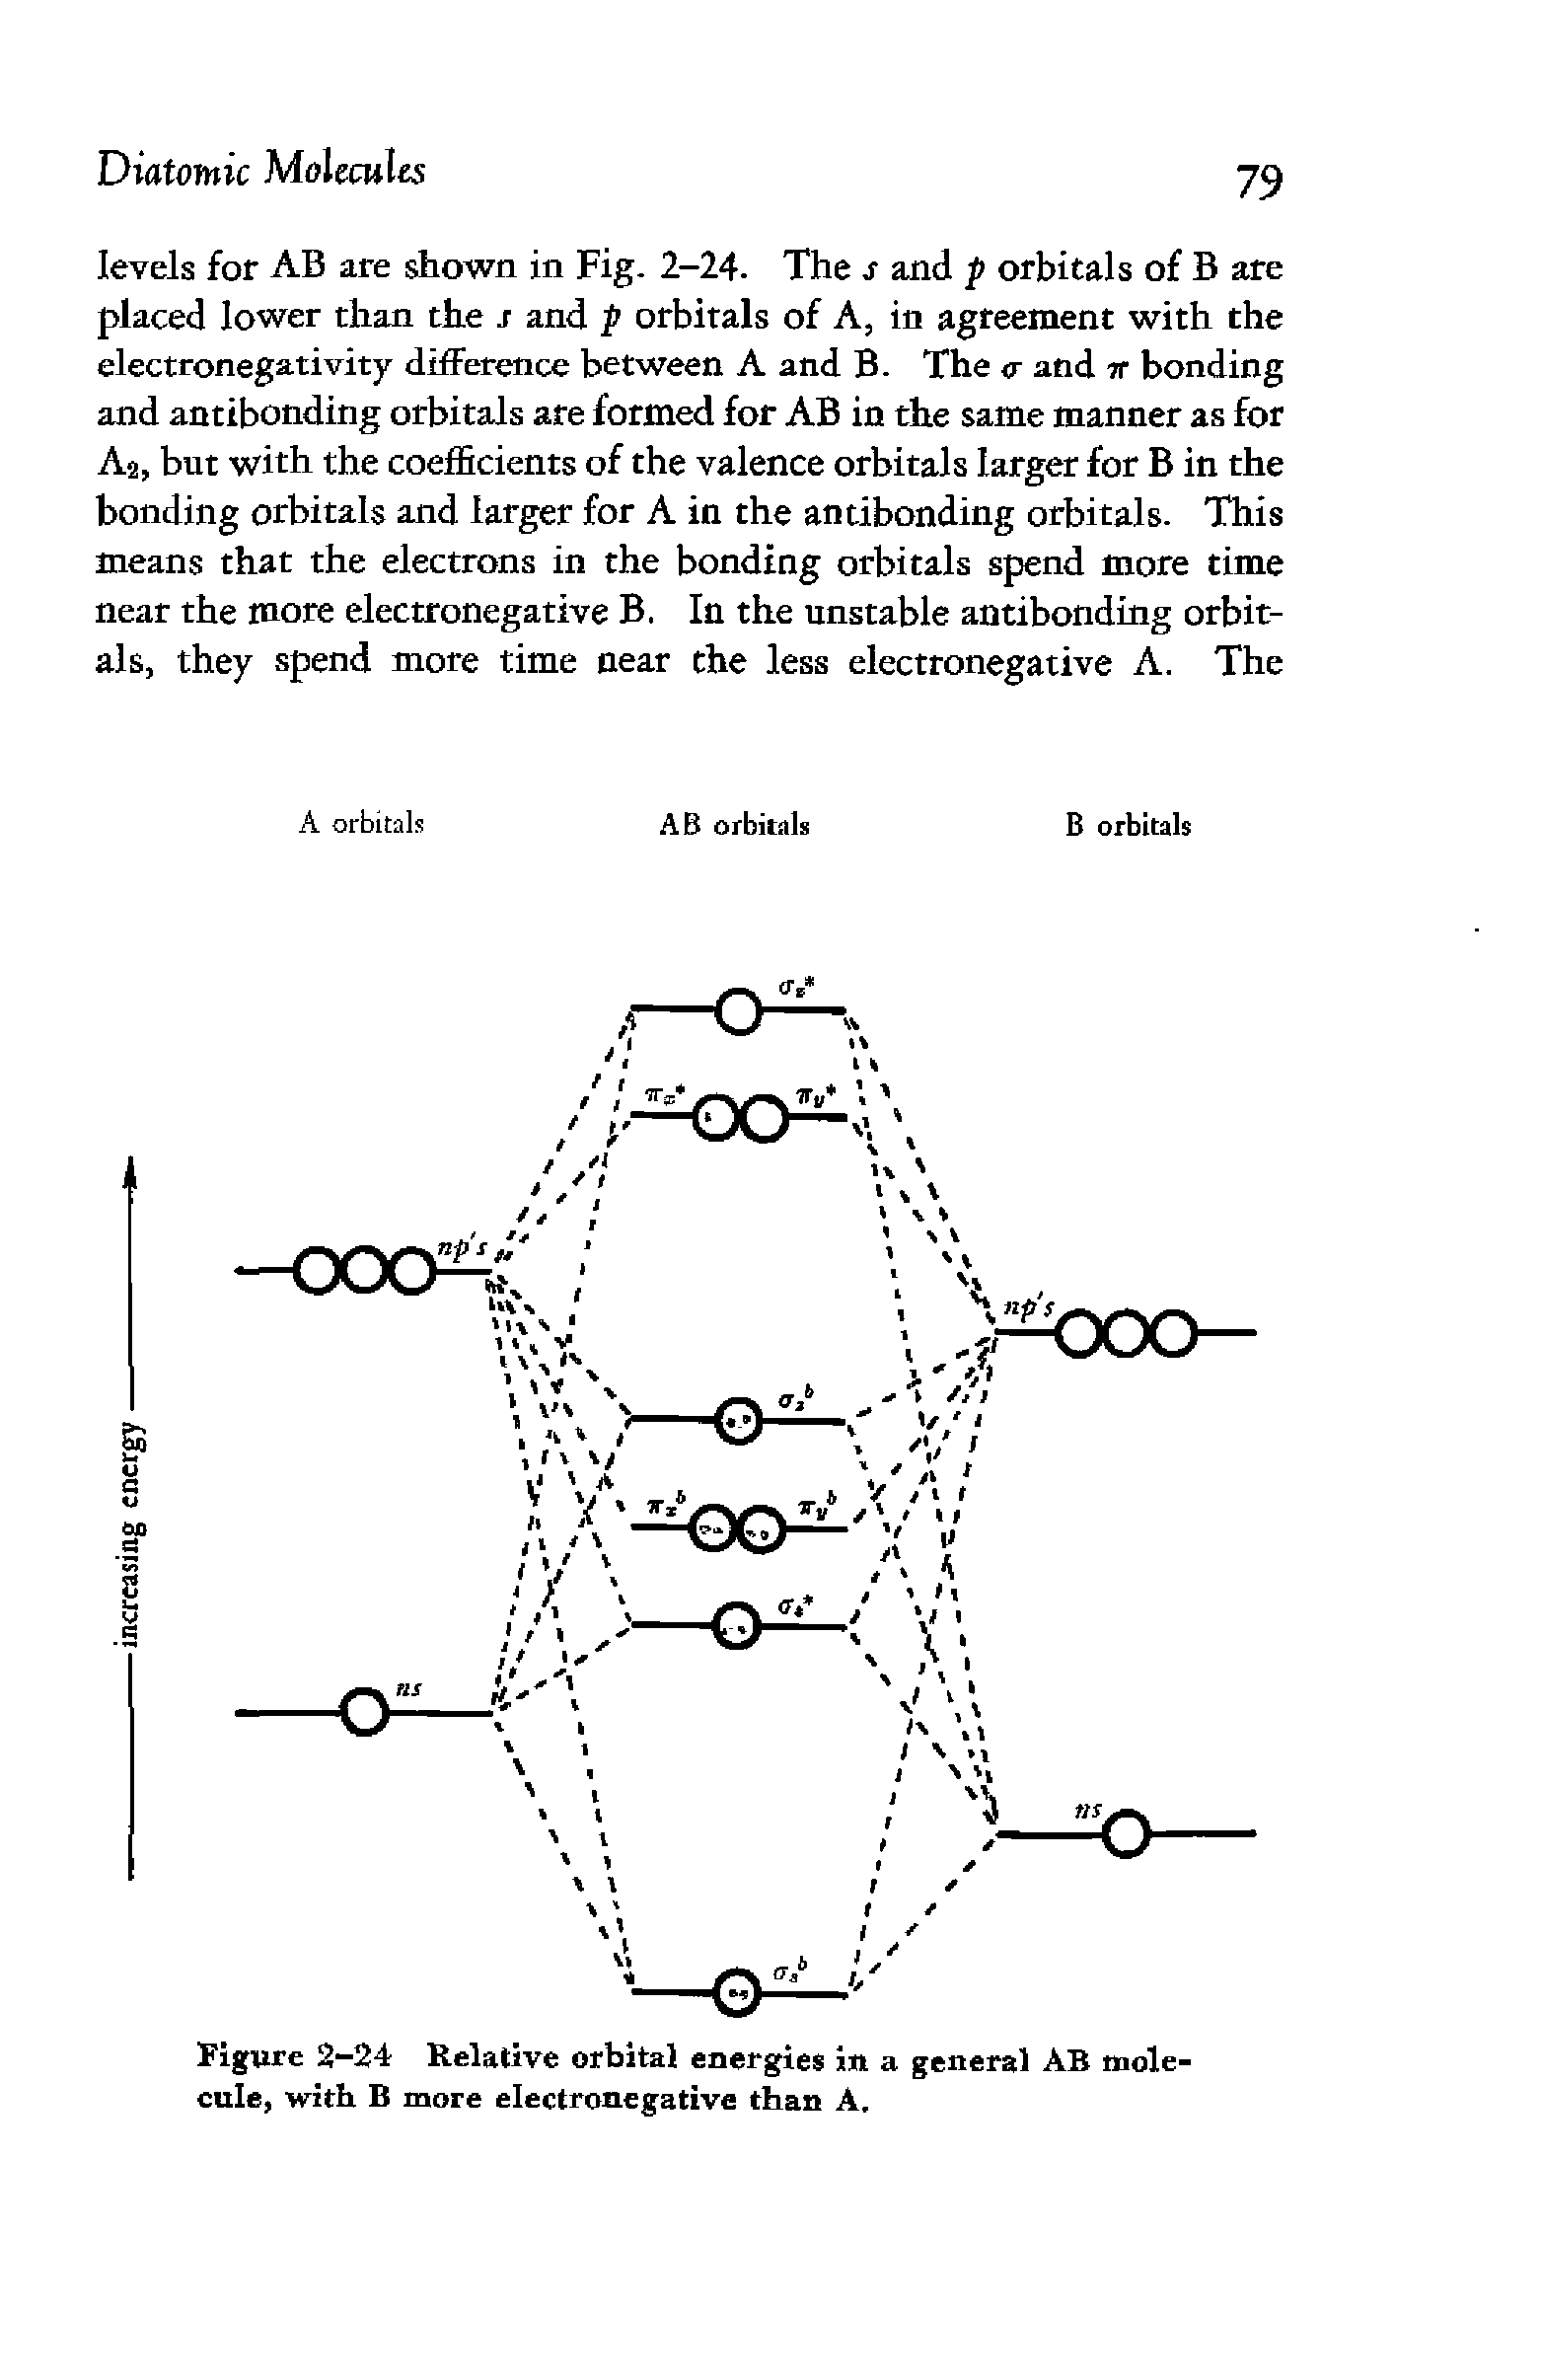 Figure 2-24 Relative orbital energies i a general AB molecule, with B more electronegative than A.